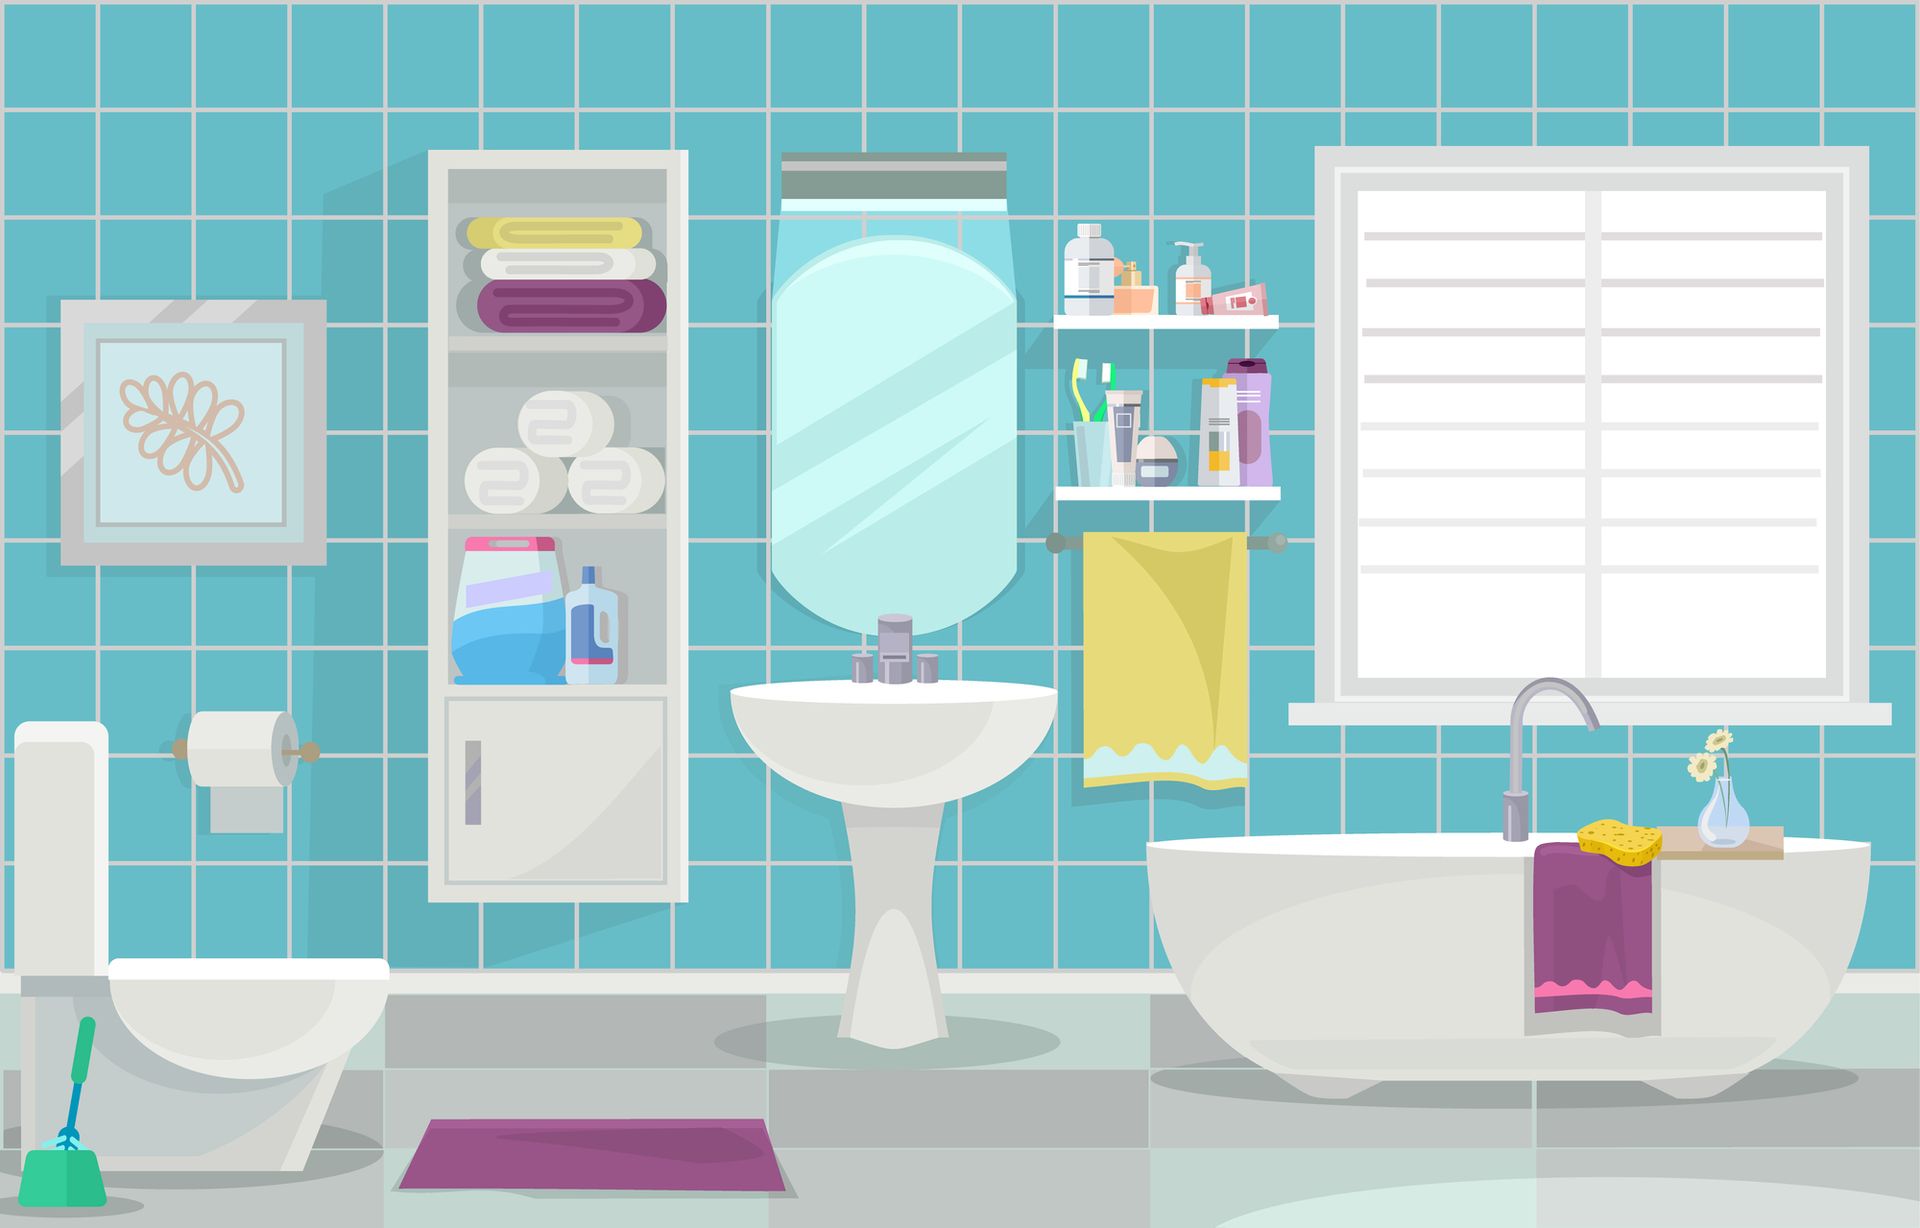 Preventing Water Damage in Your Bathroom: Signs to Look Out For